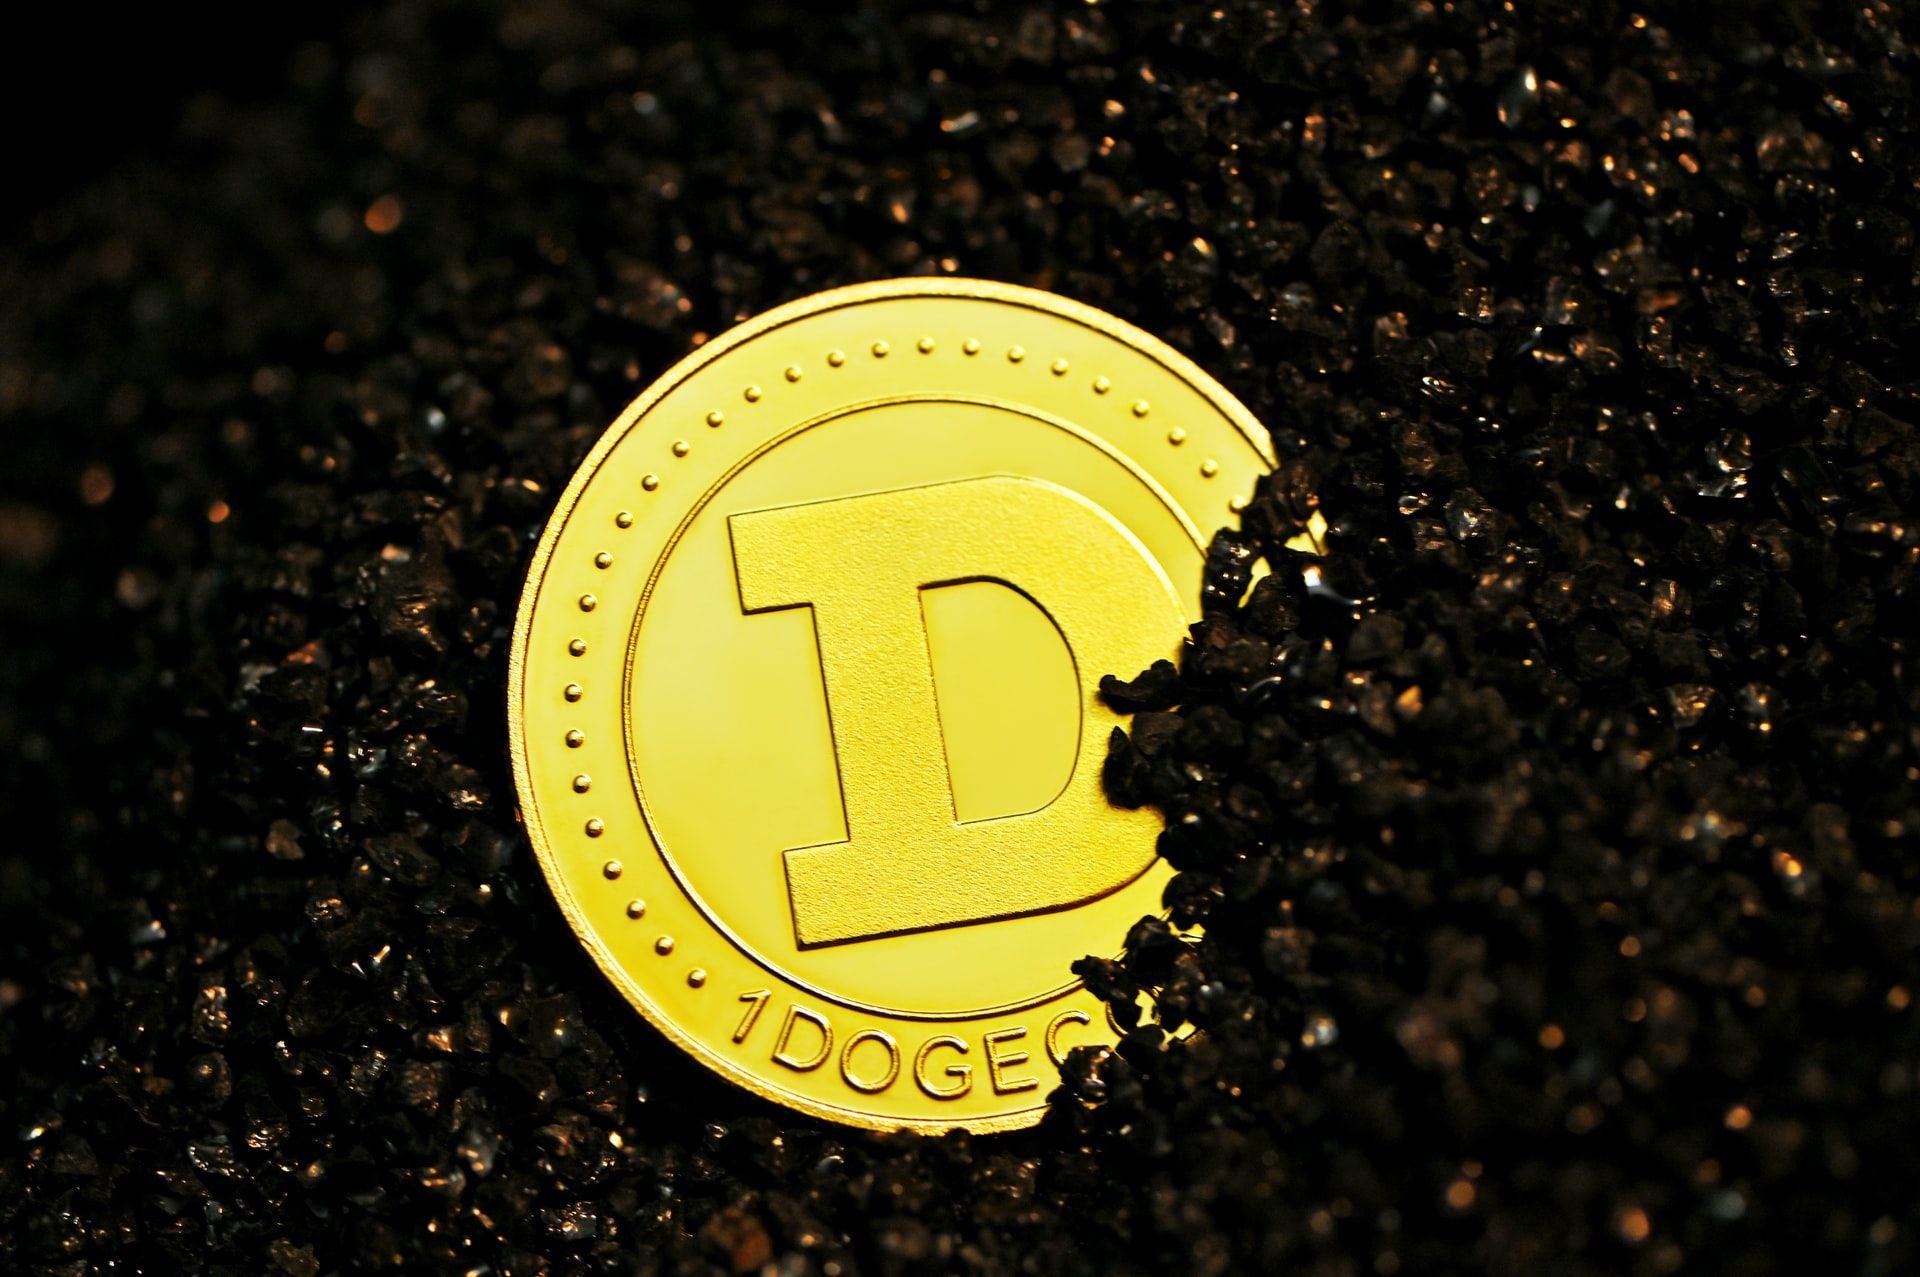 Image of a physical Dogecoin